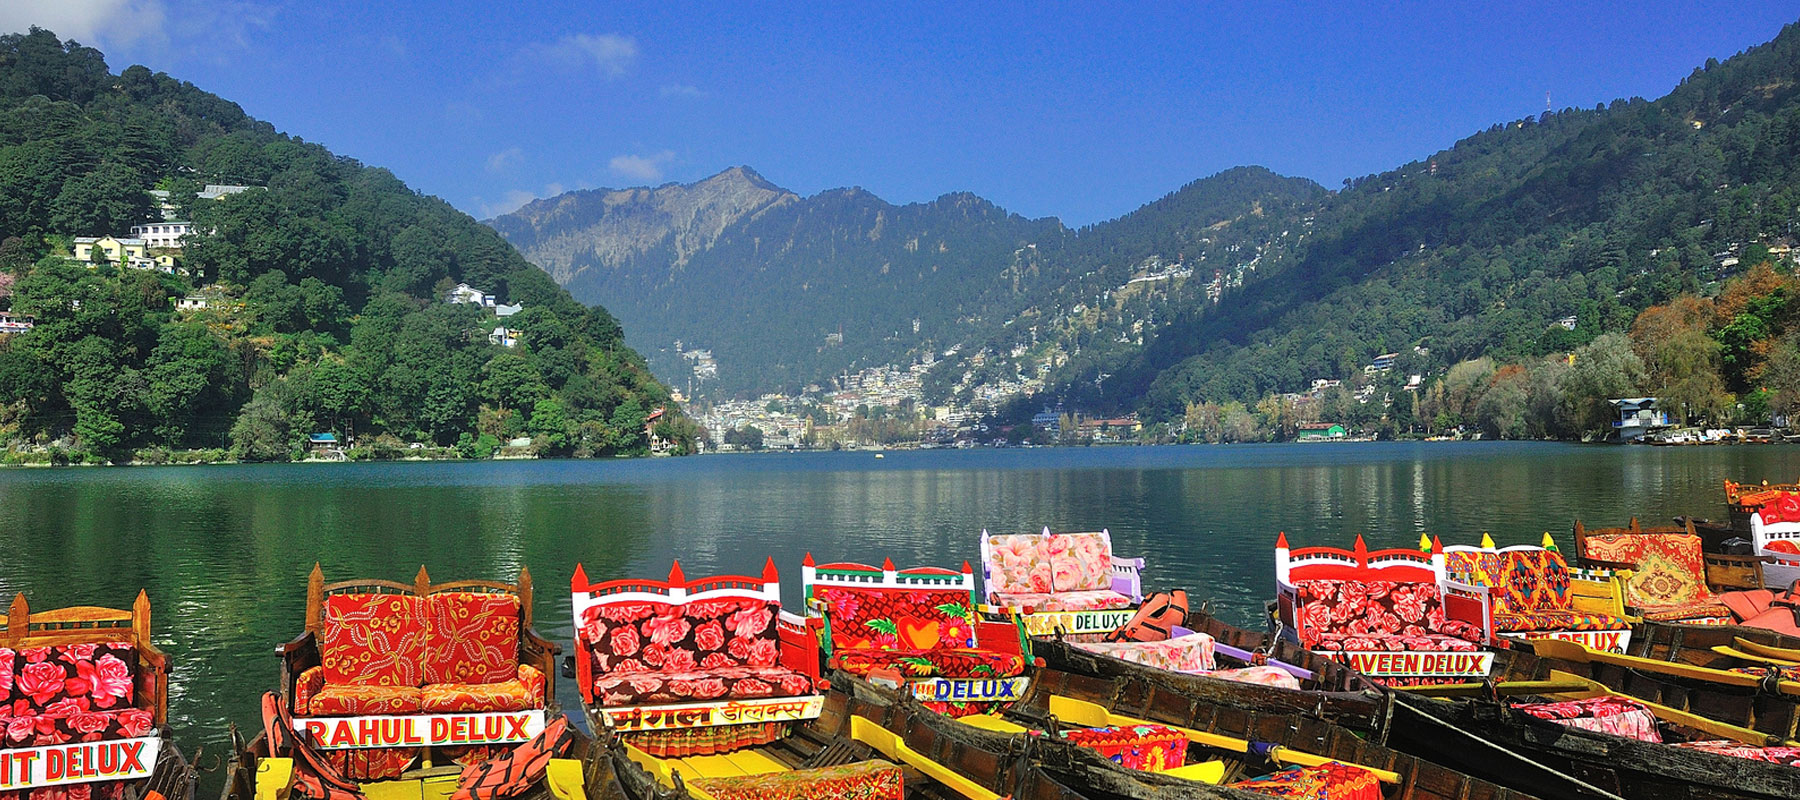 15 Best Things To Do In Nainital For An Amazing Trip